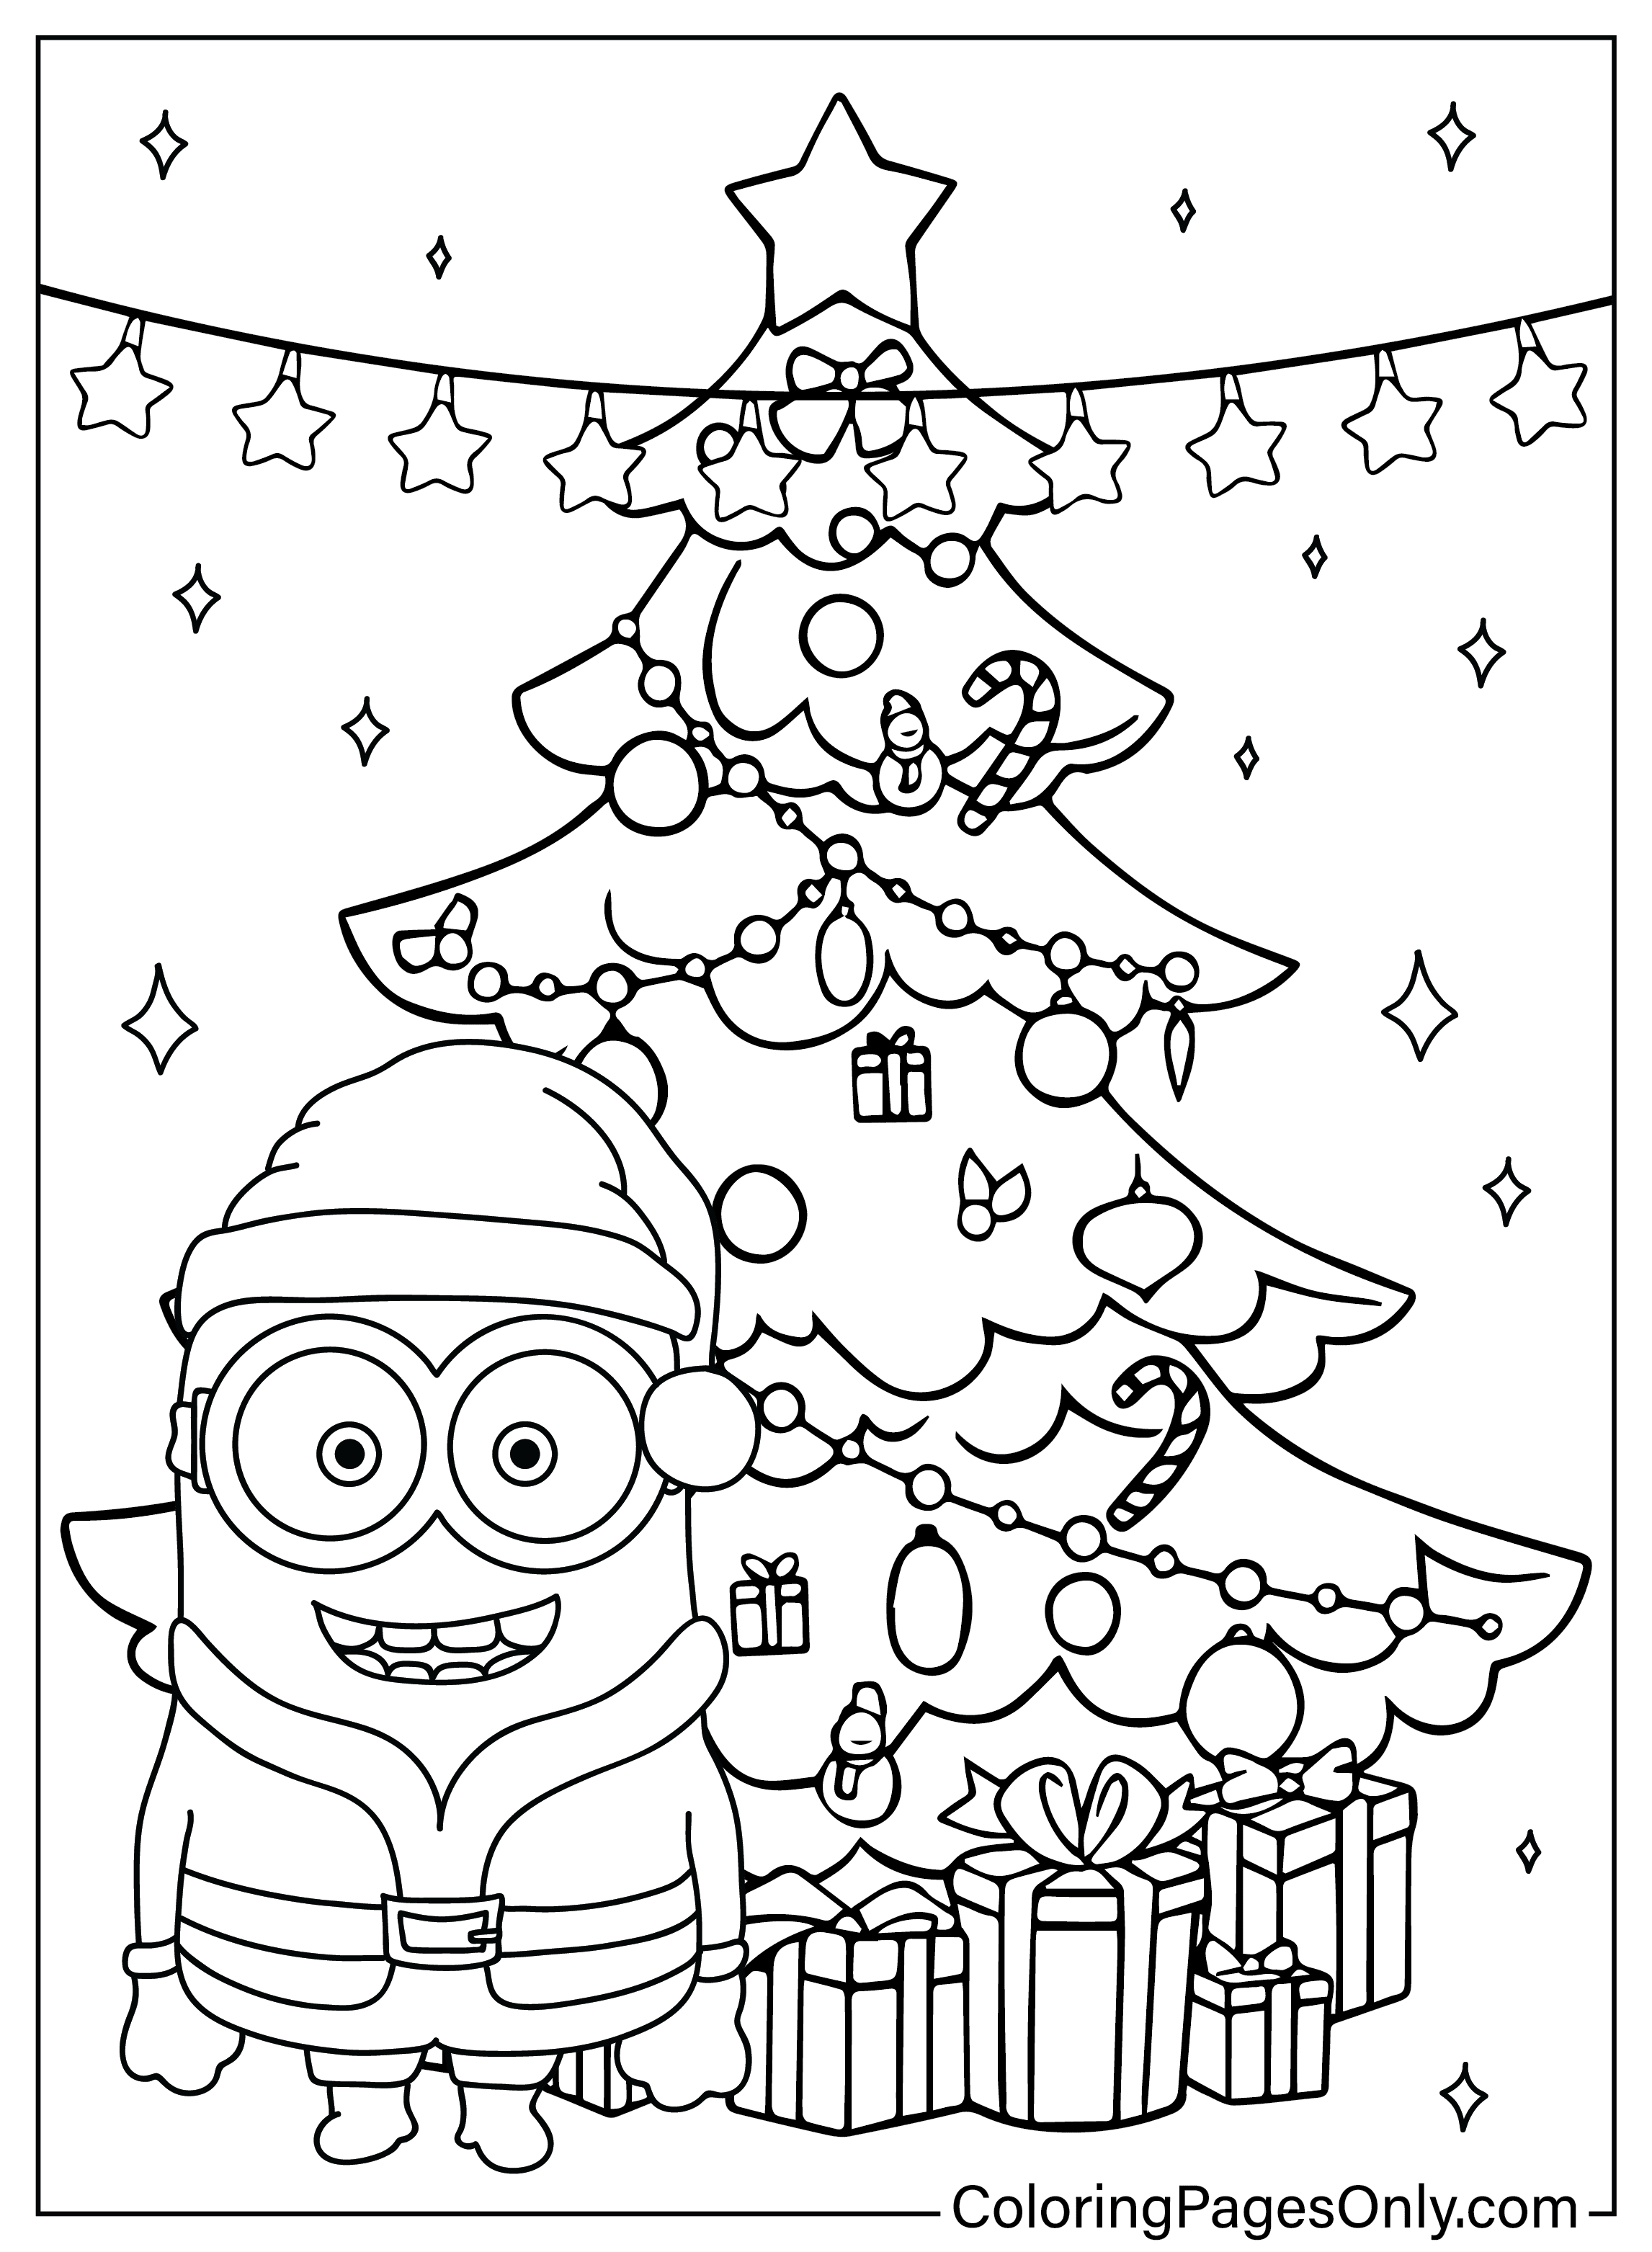 Christmas Minion Coloring Page from Christmas Cartoon